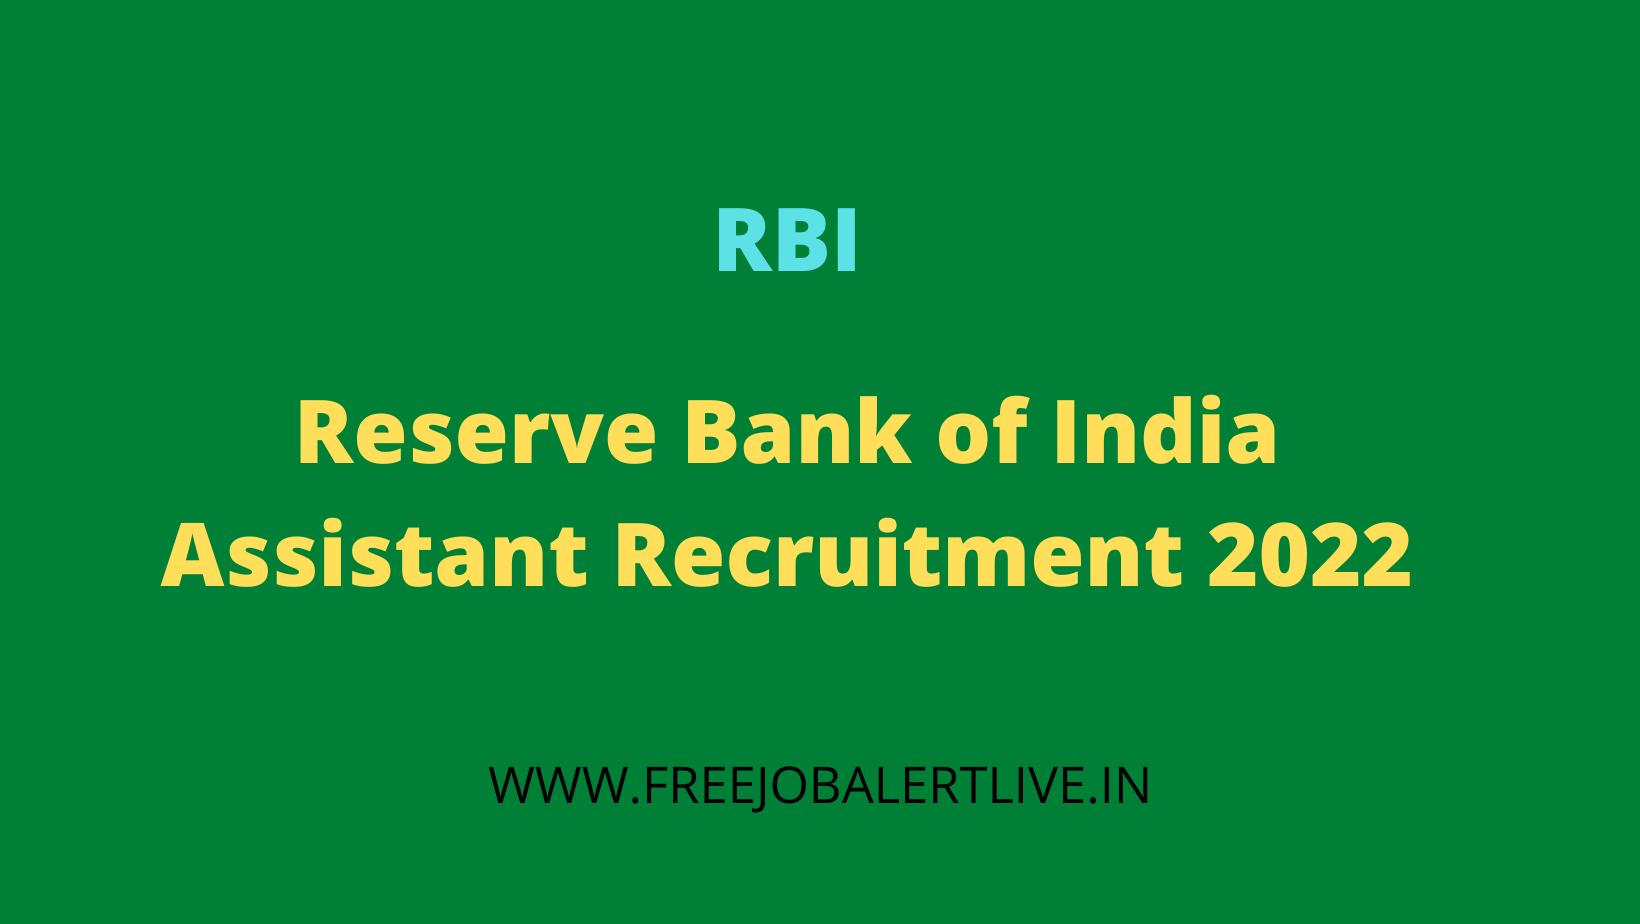 Reserve Bank of India Assistant Recruitment 2022